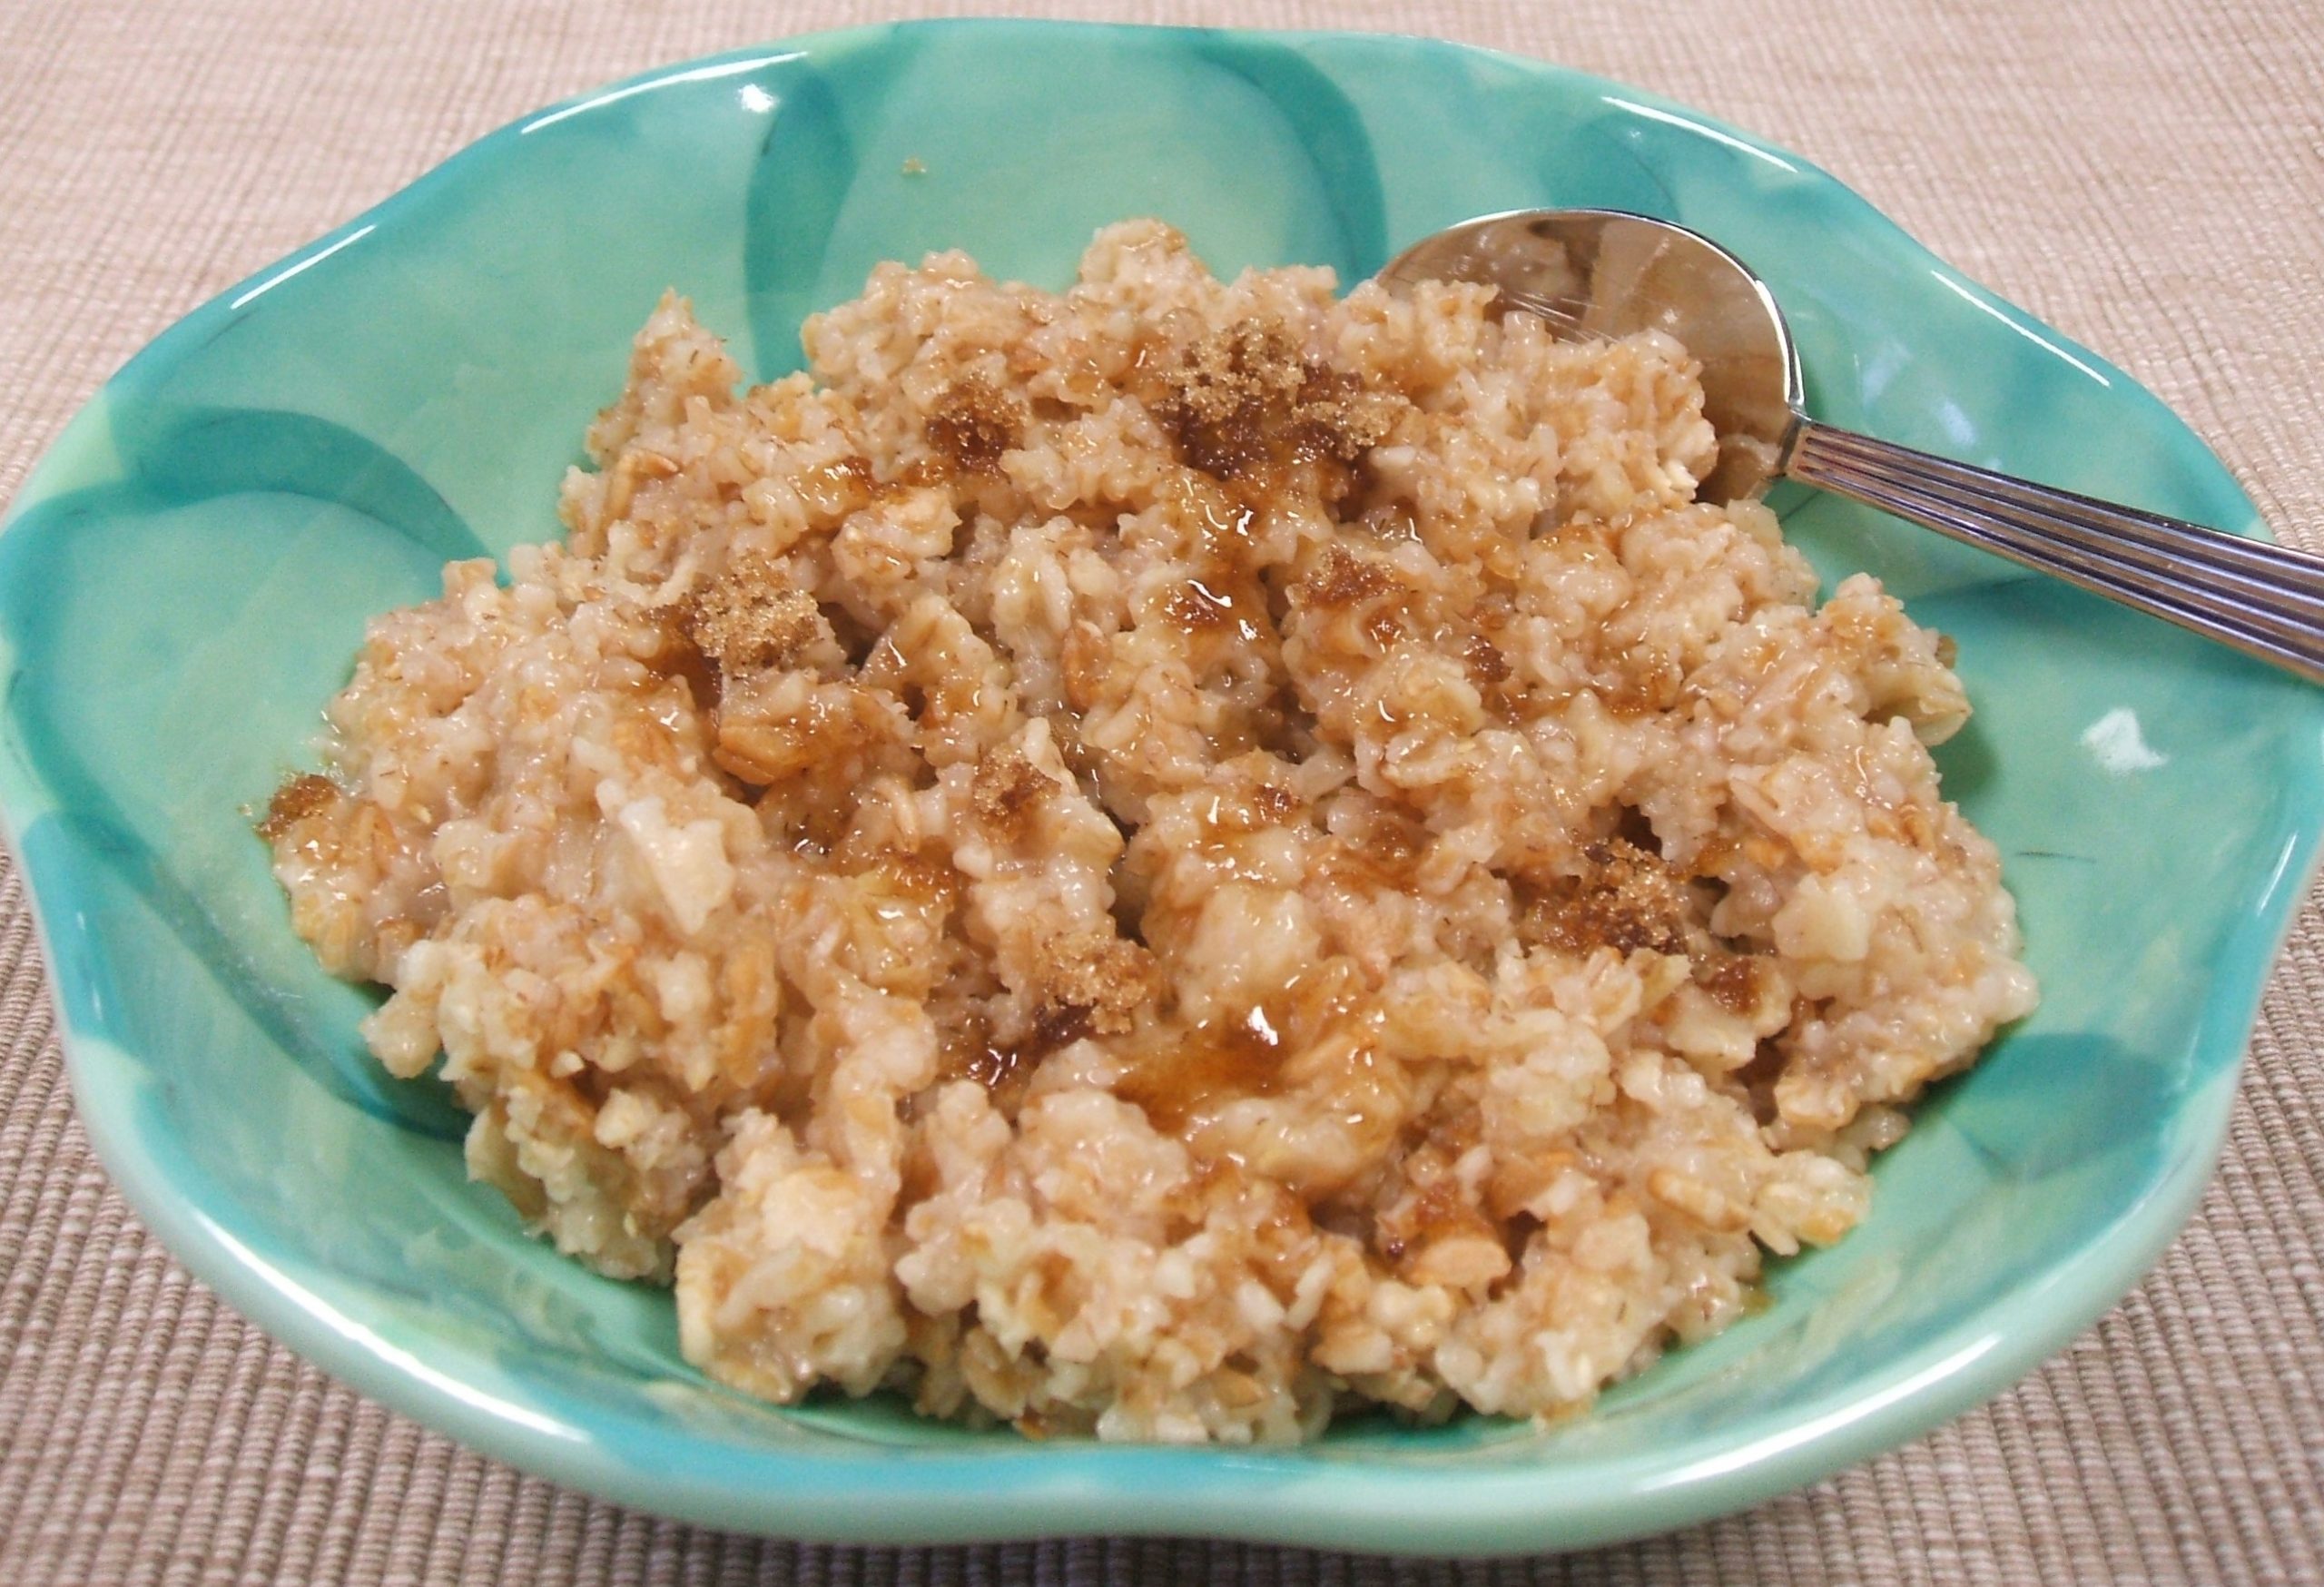 A bowl of cooked Quick Whole Grain Cereal